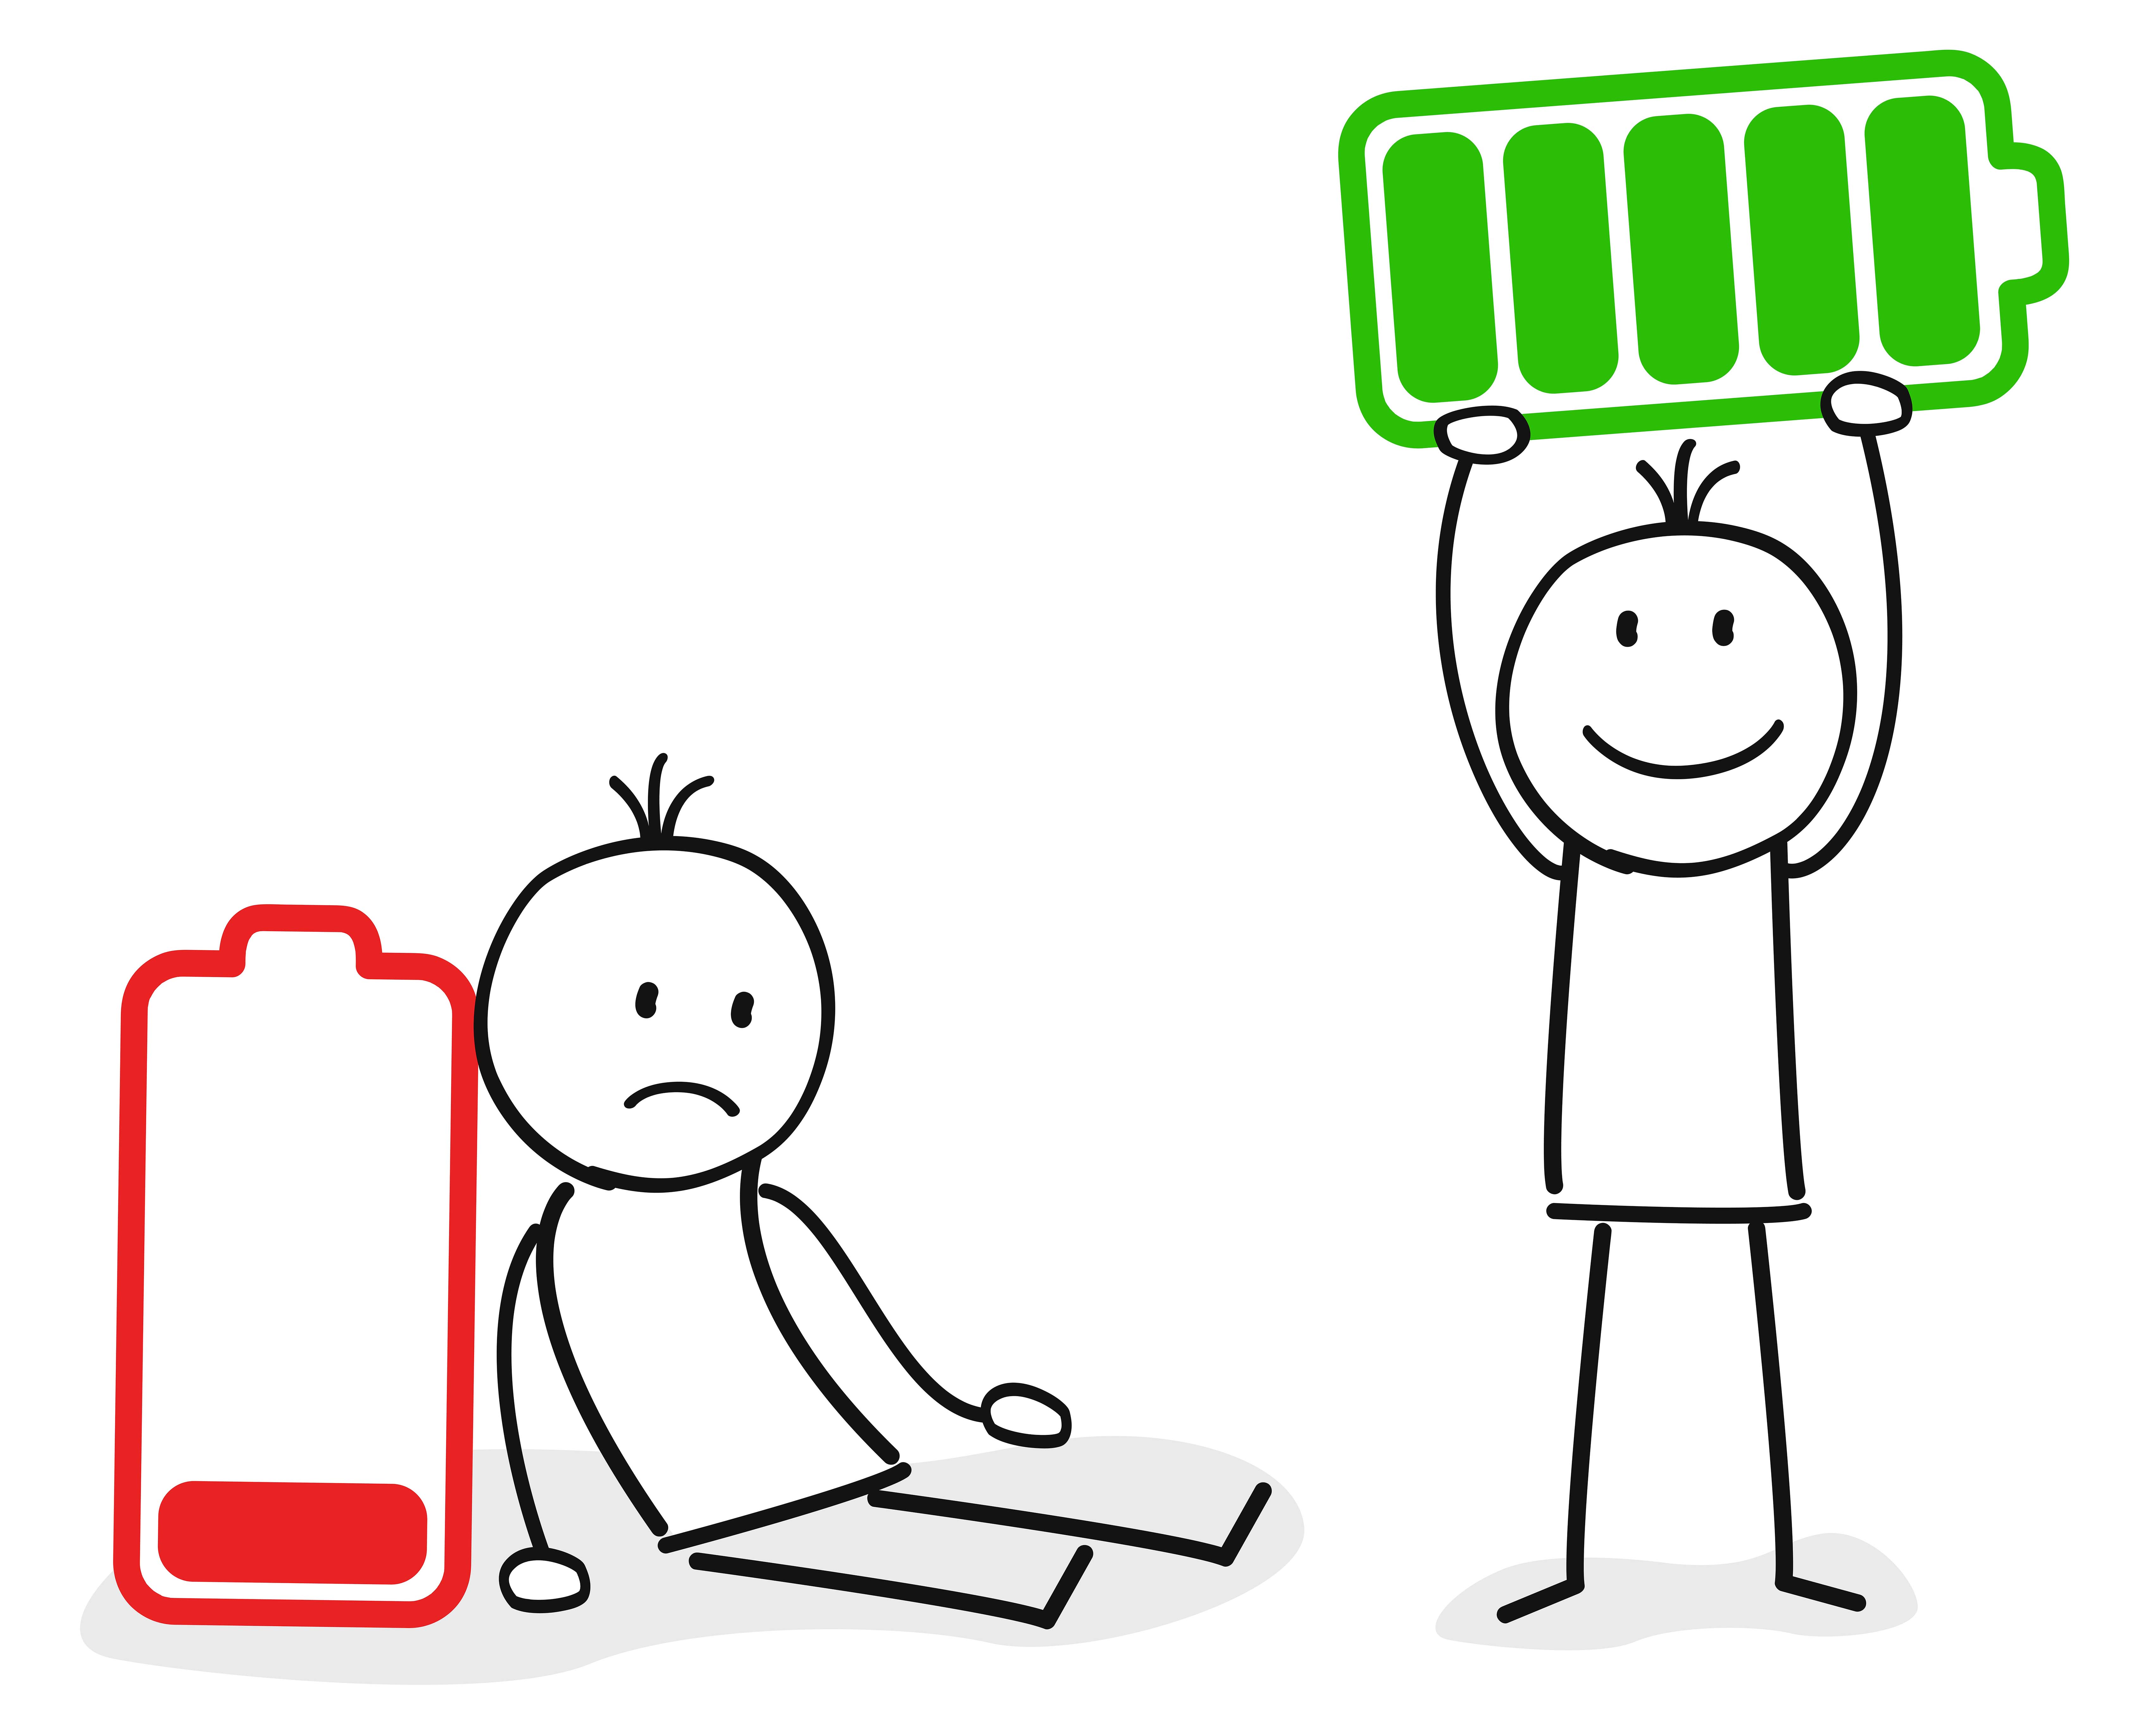 stick figure of a person against a battery with low power sitting next to another stick figure with batter depicting full power